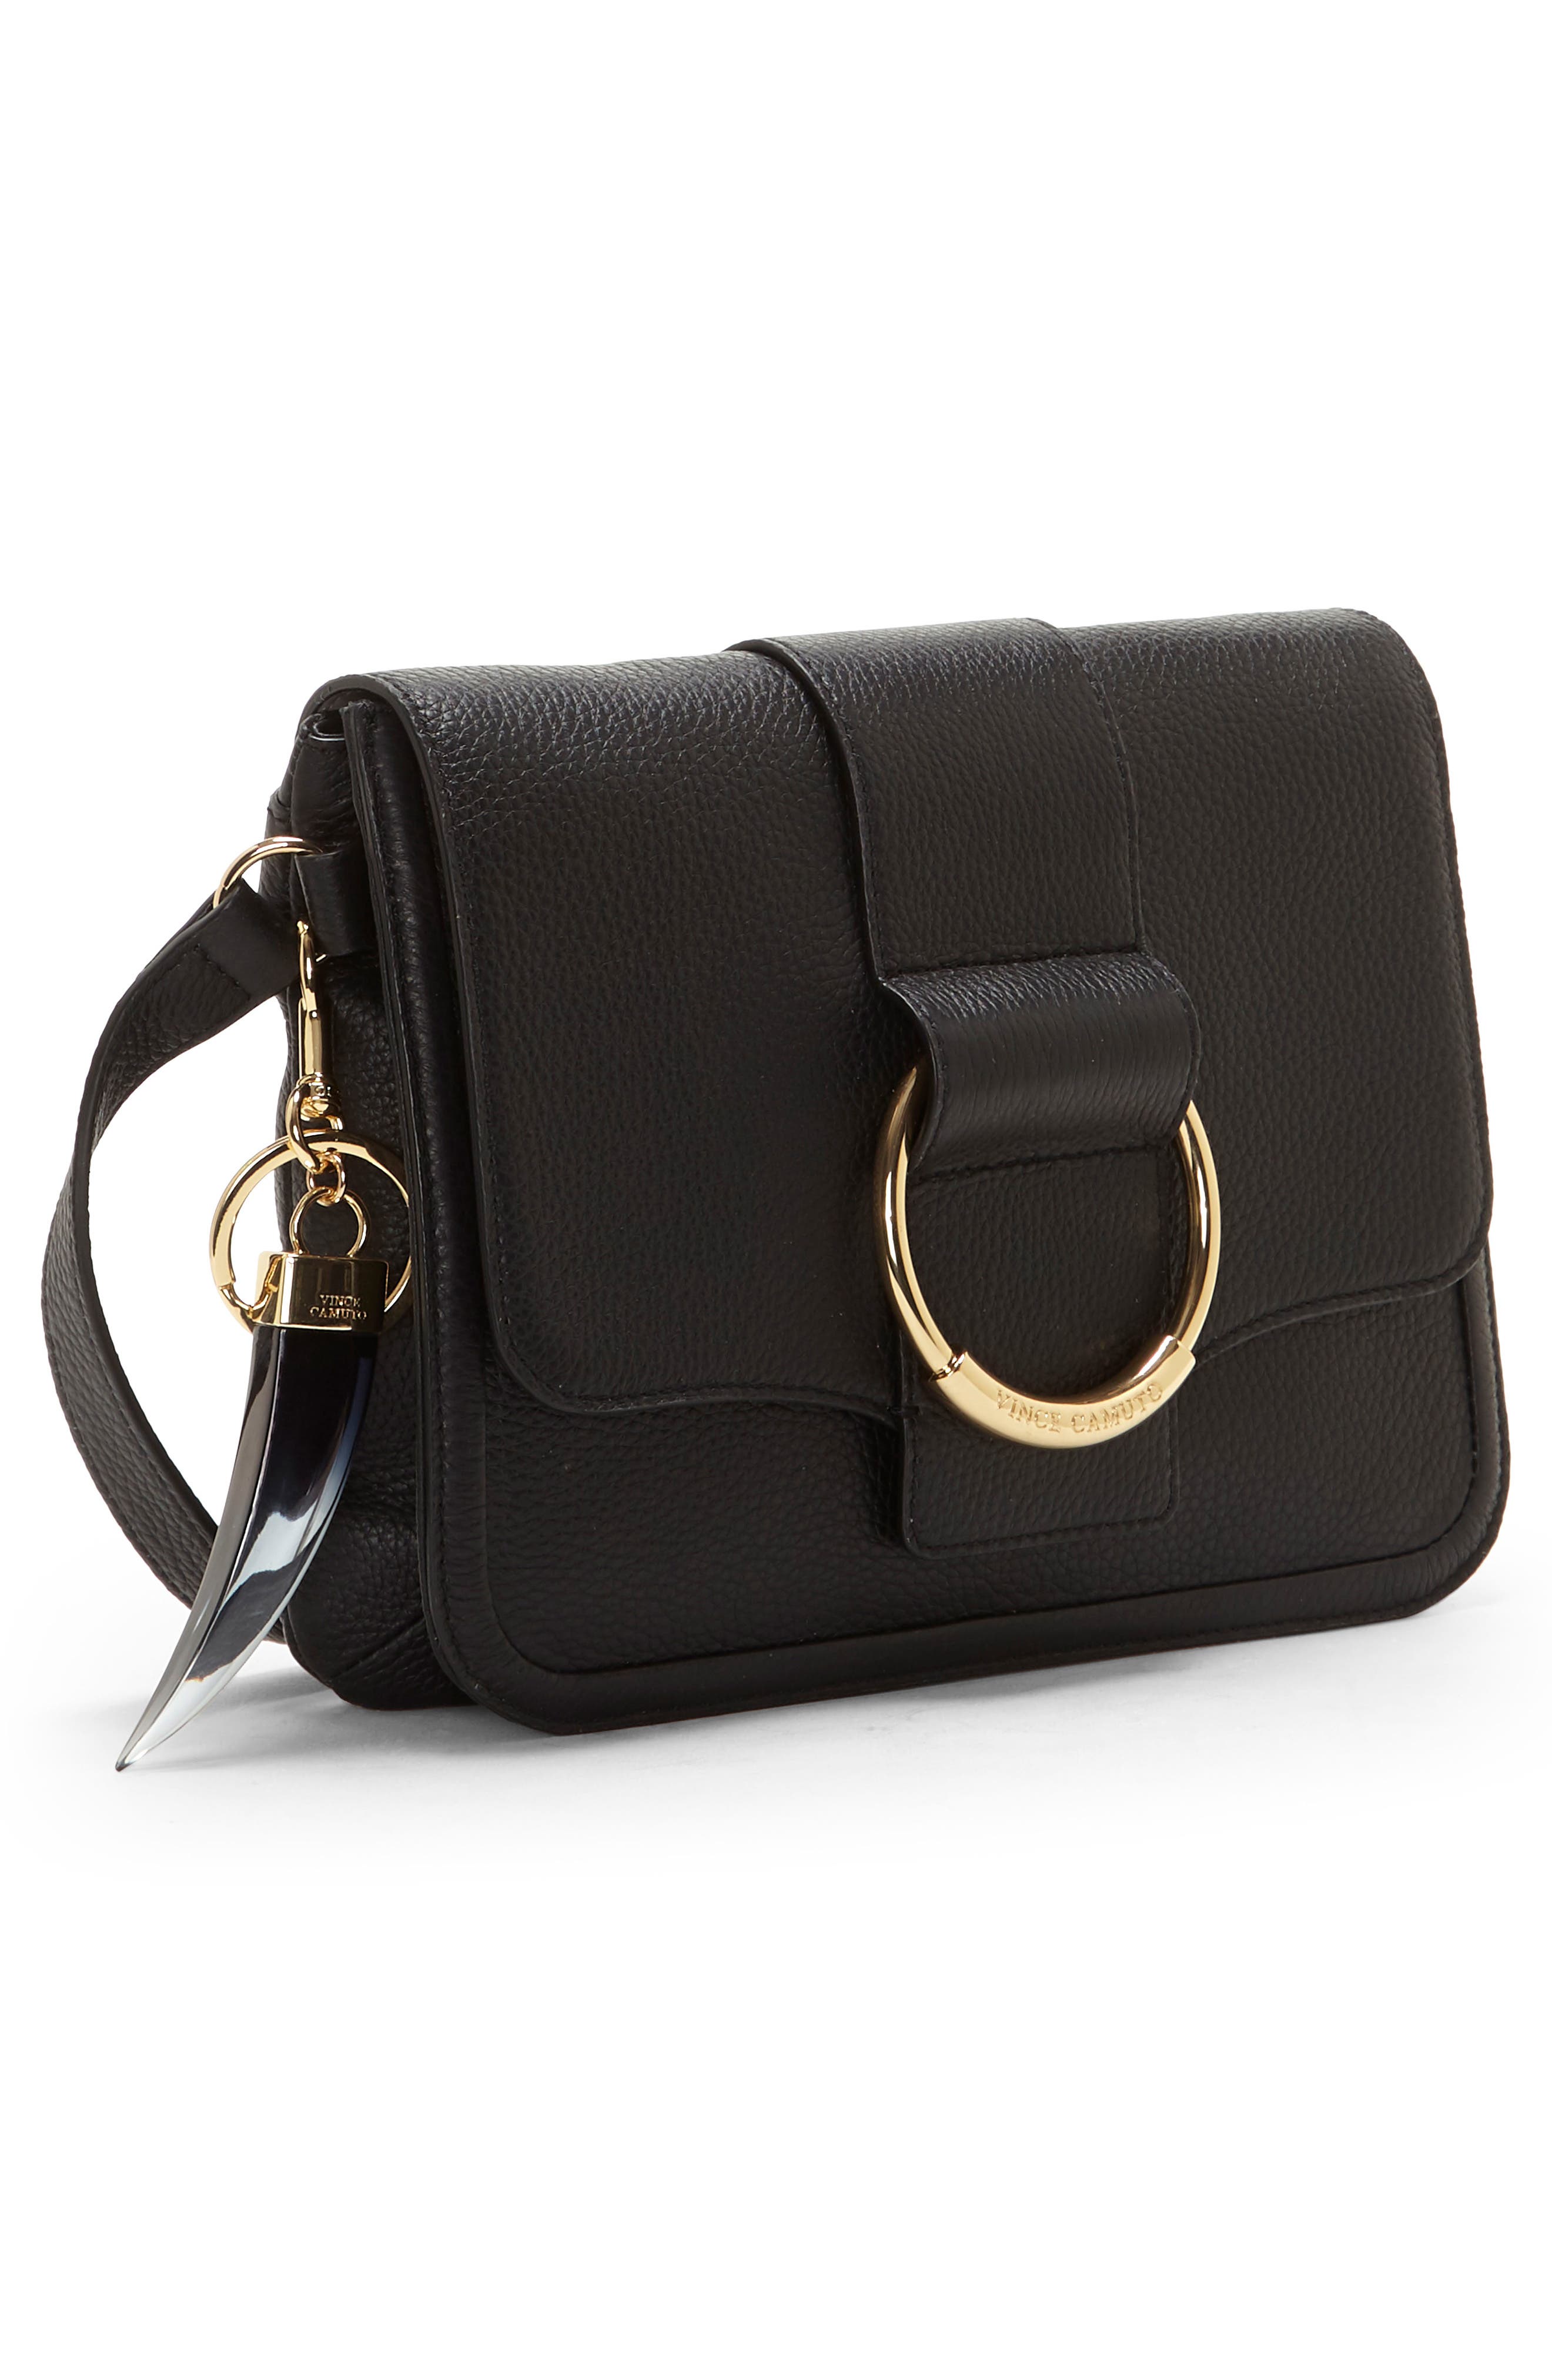 Vince Camuto | Caia Leather Flap Crossbody Bag | Nordstrom Rack